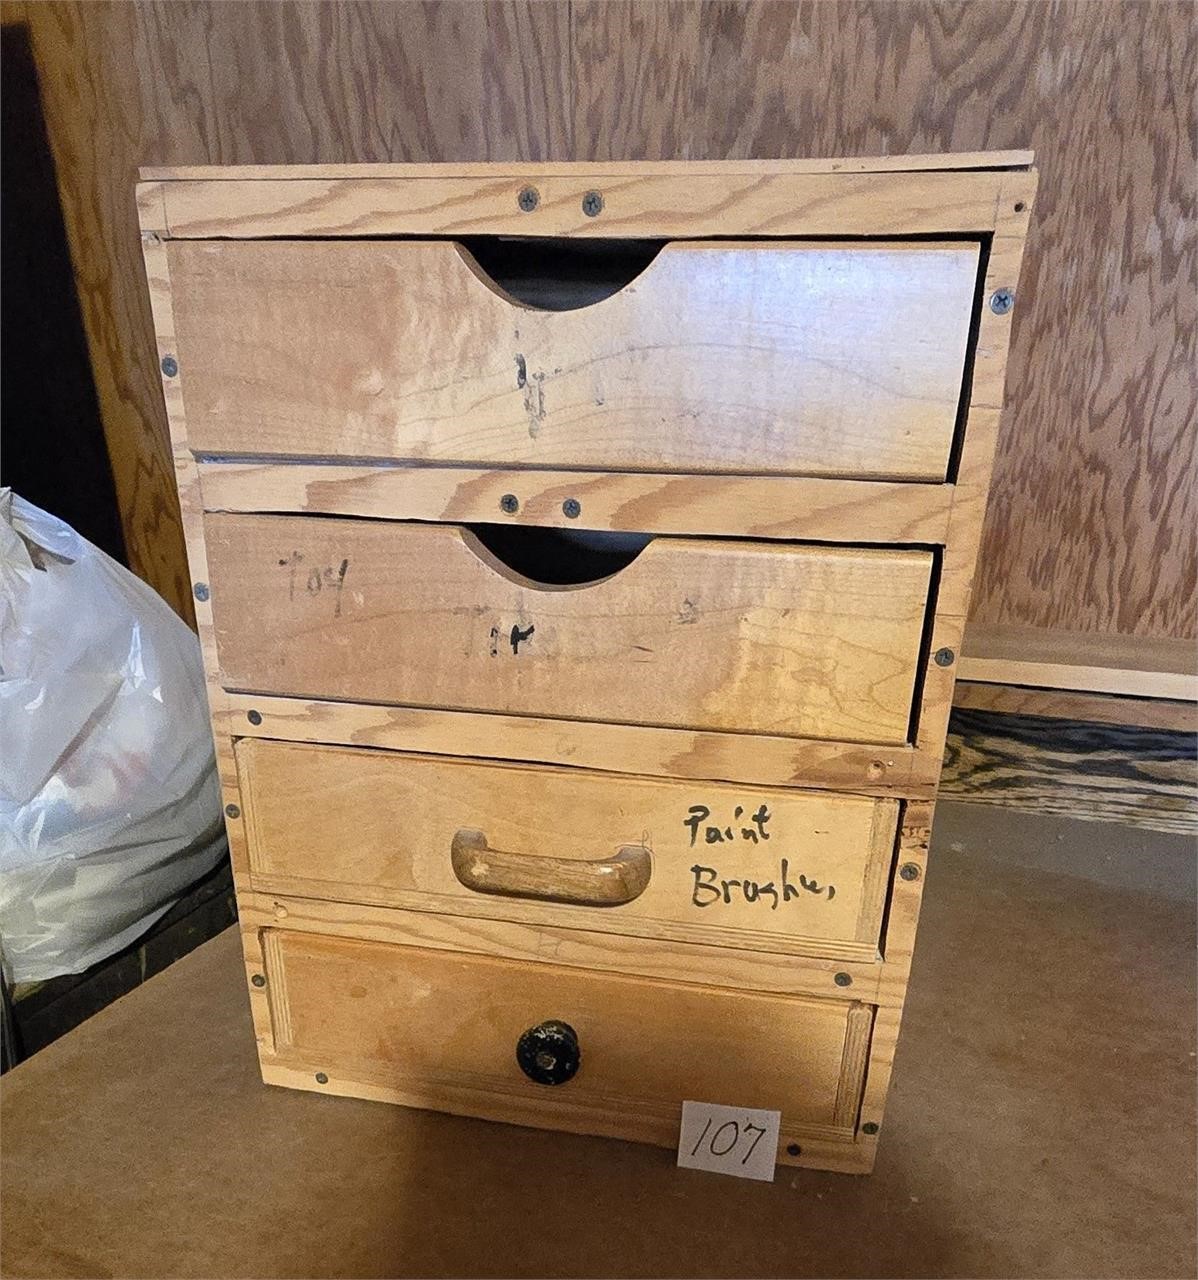 Small Wood Chest